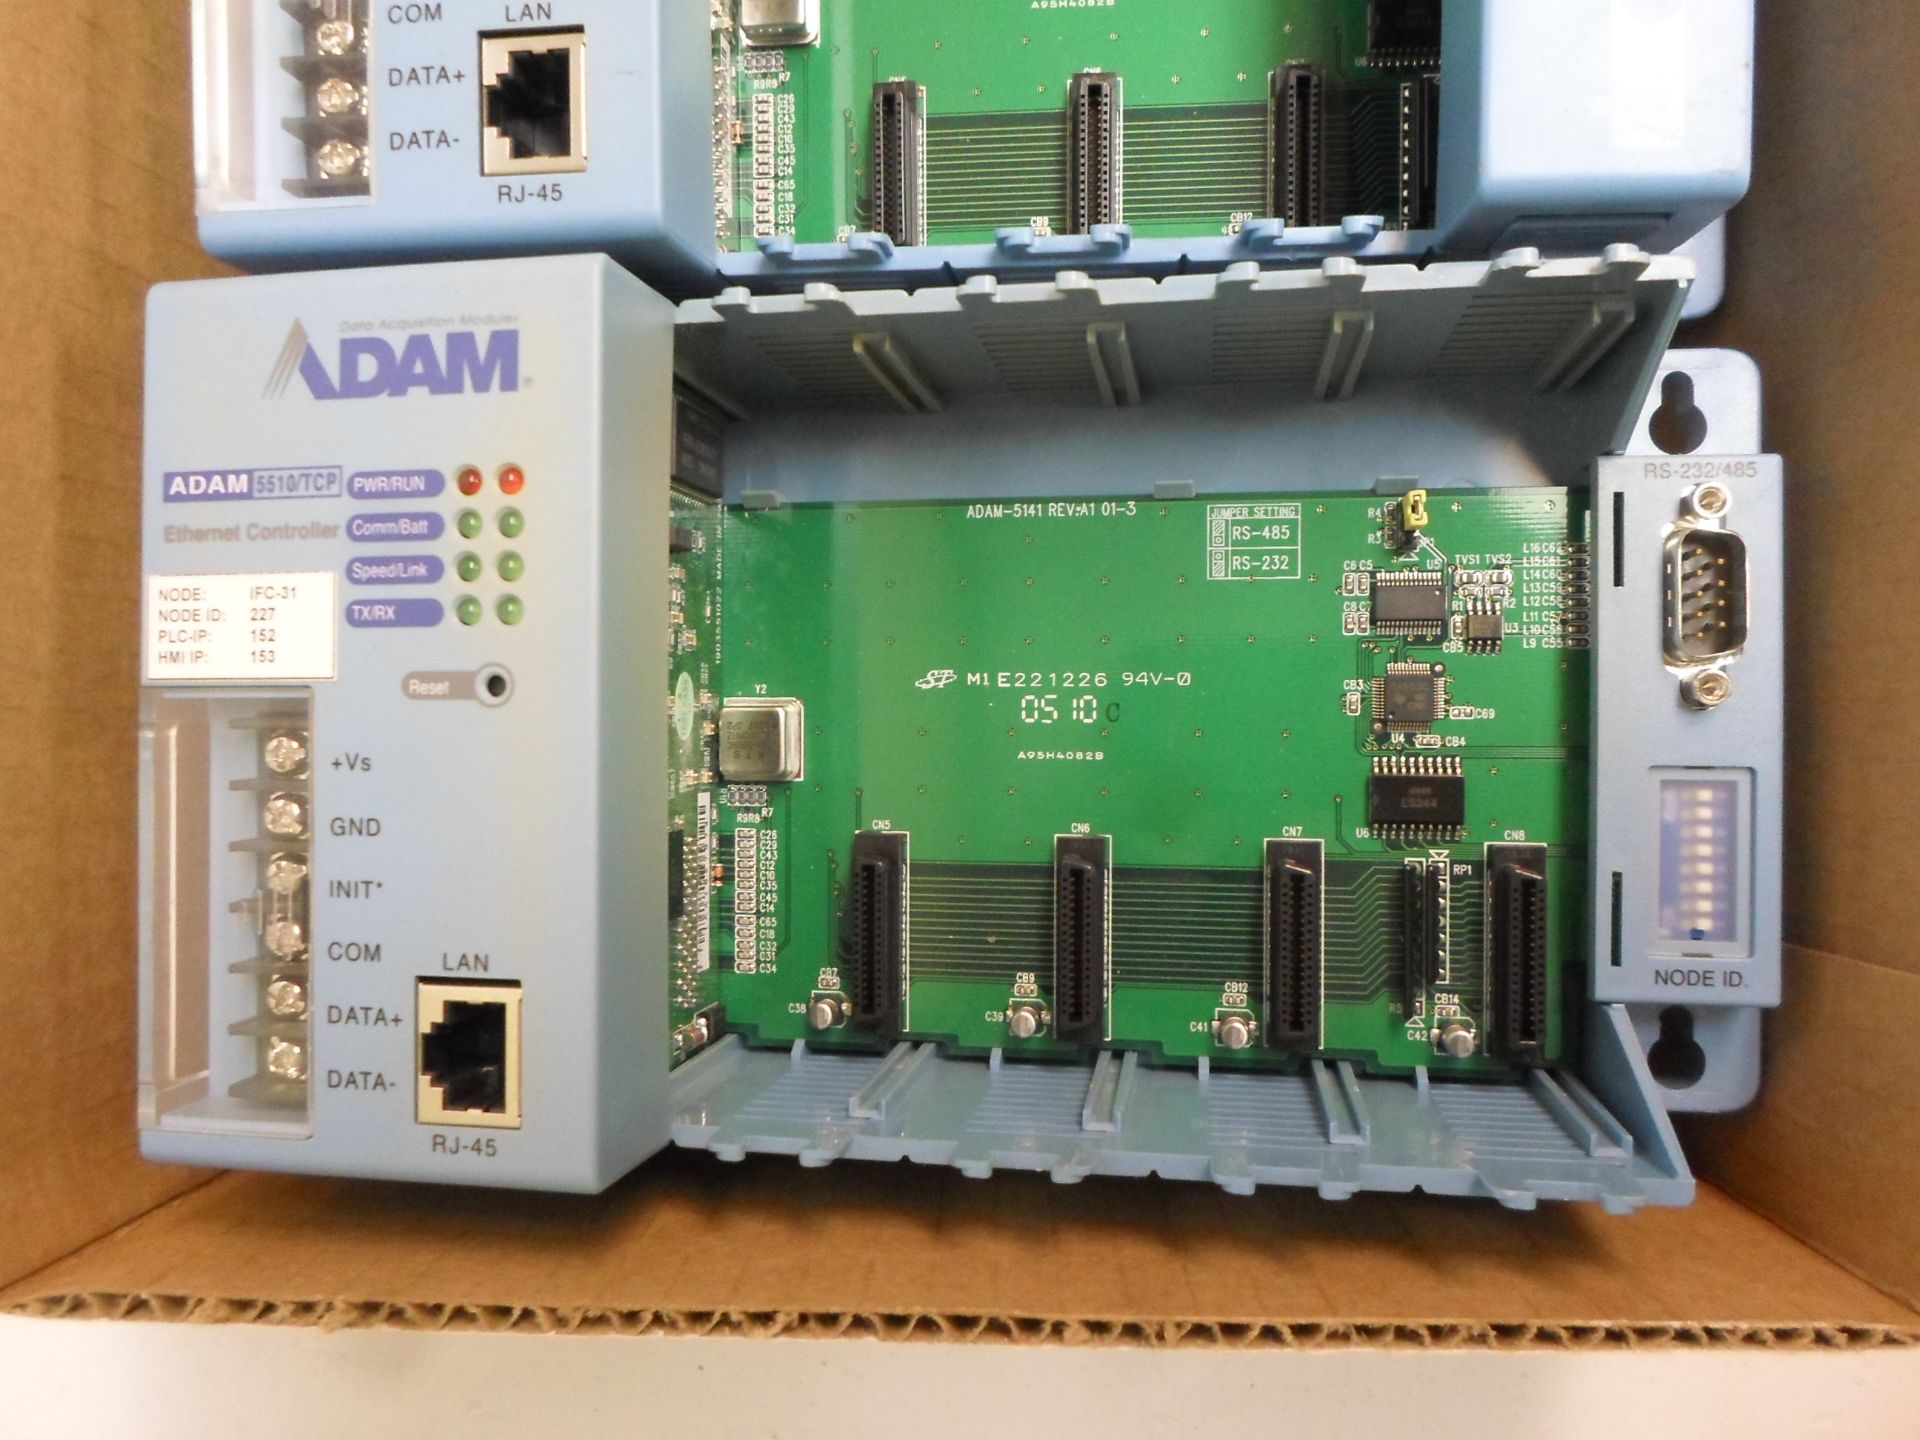 LOT OF TWO ADAM 5510/TCP ICF-31 ETHERNET CONTROLLER - Image 2 of 3